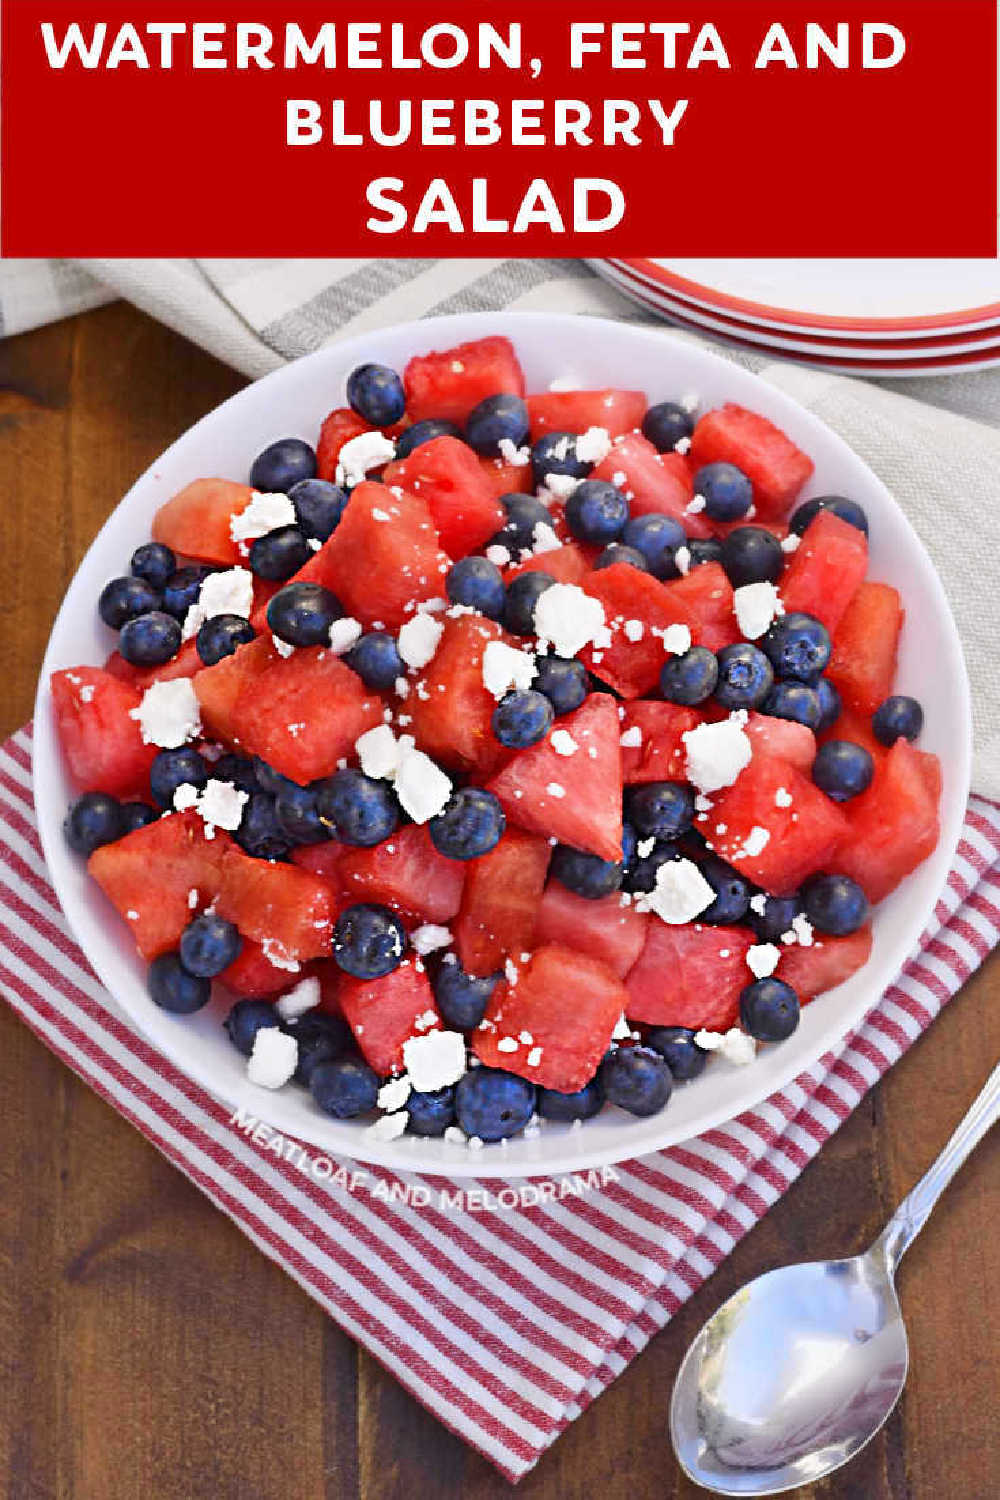 Watermelon Feta and Blueberry Salad a refreshing summer salad with juicy watermelon, fresh blueberries and salty feta cheese. This easy recipe makes a gorgeous red white and blue salad perfect for any patriotic holiday. via @meamel